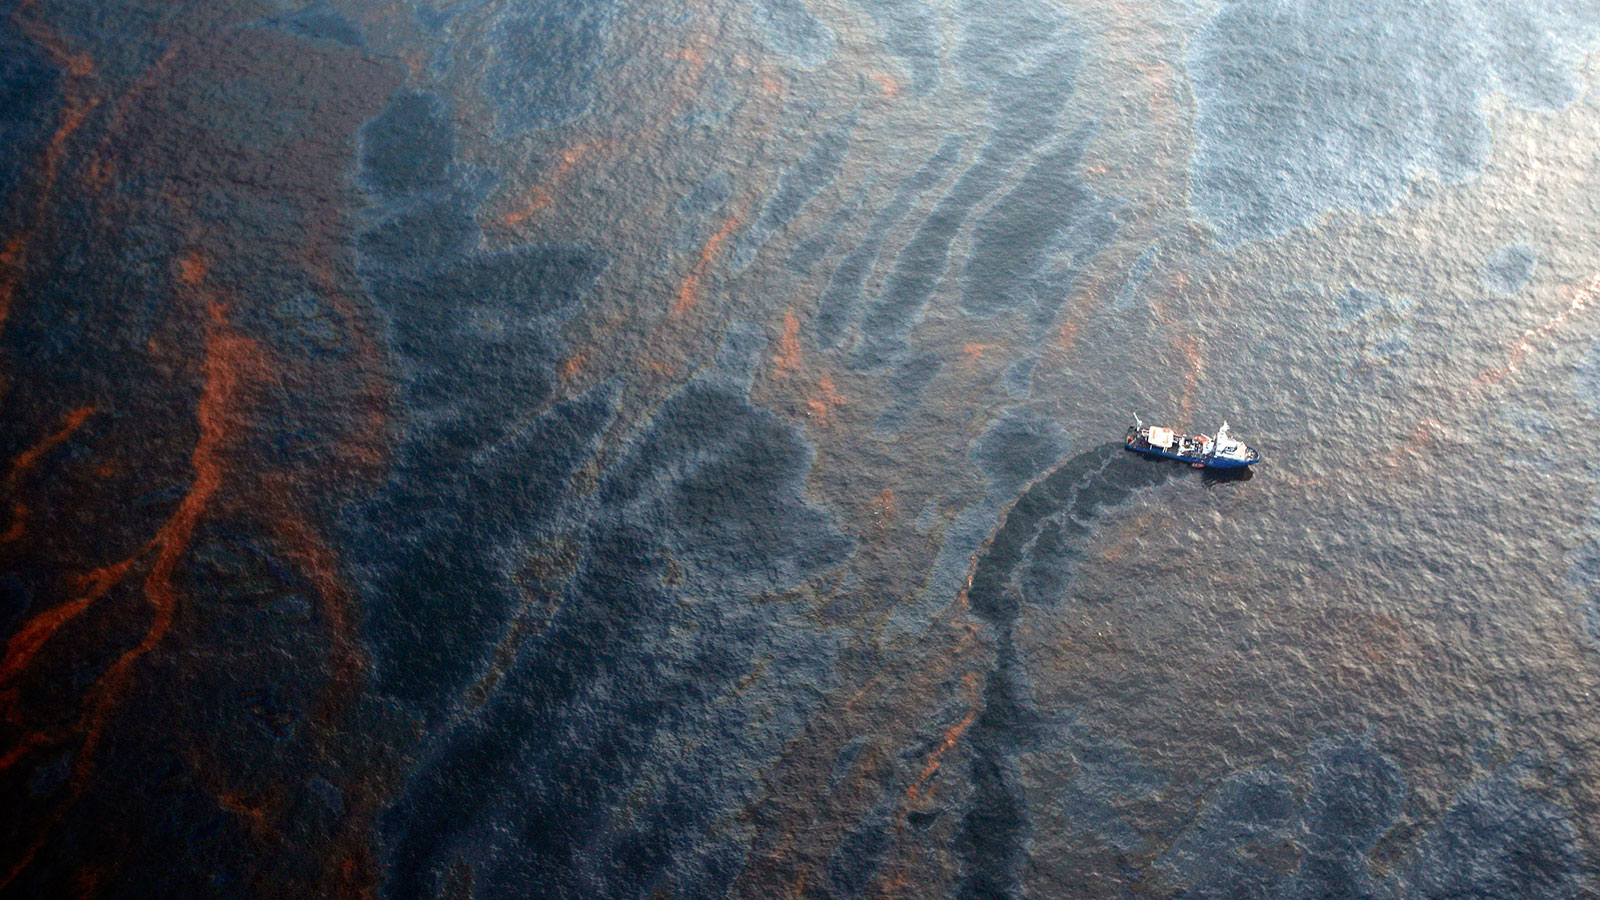 Believe it or not, the Deepwater Horizon oil spill was even worse than